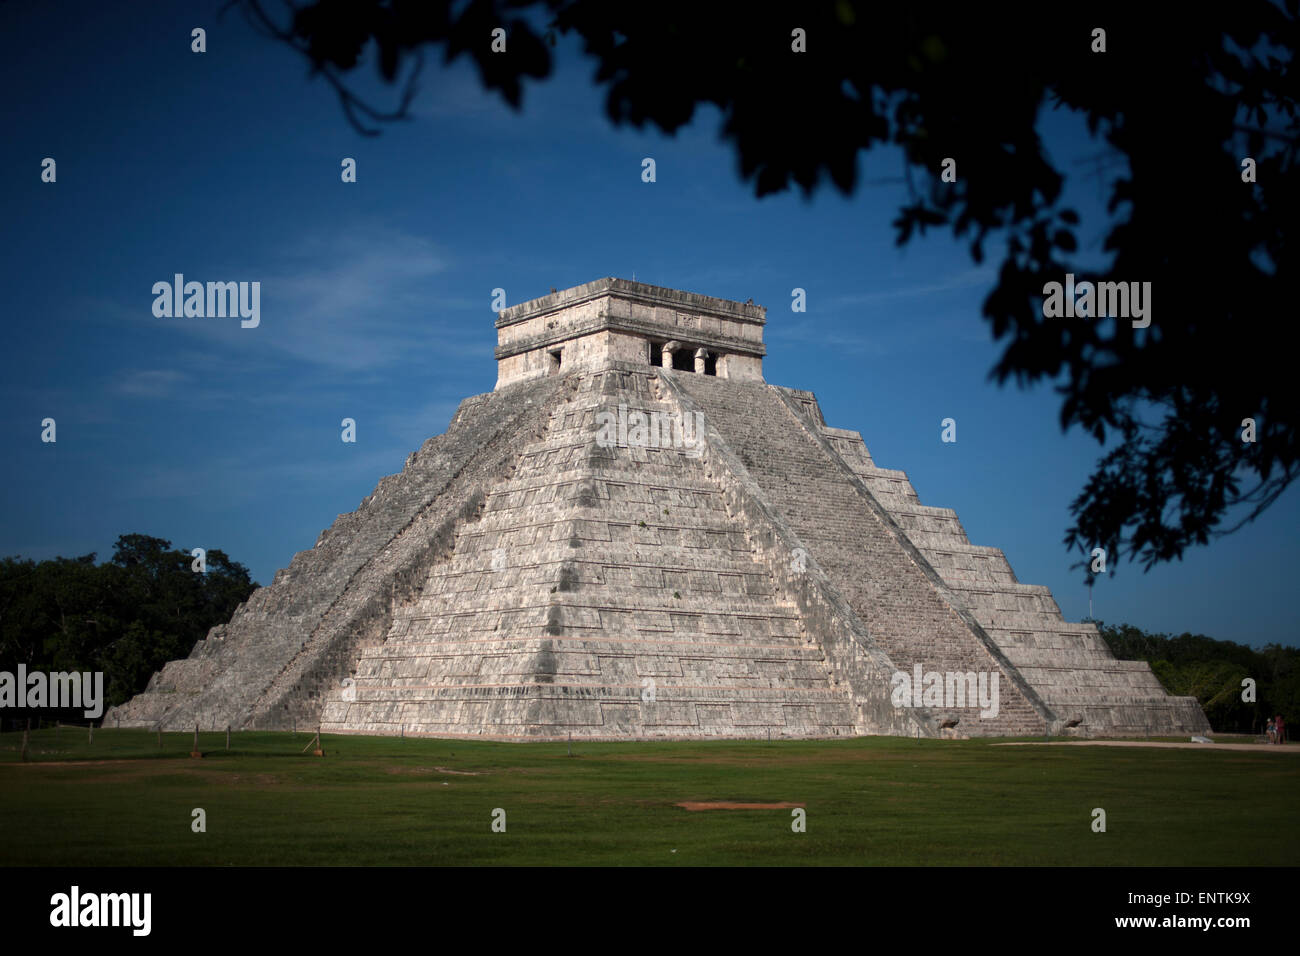 The Temple of Kukulkan, the Feathered Serpent god, in the Mayan city of Chichen Itza, Yucatan Peninsula, Mexico Stock Photo